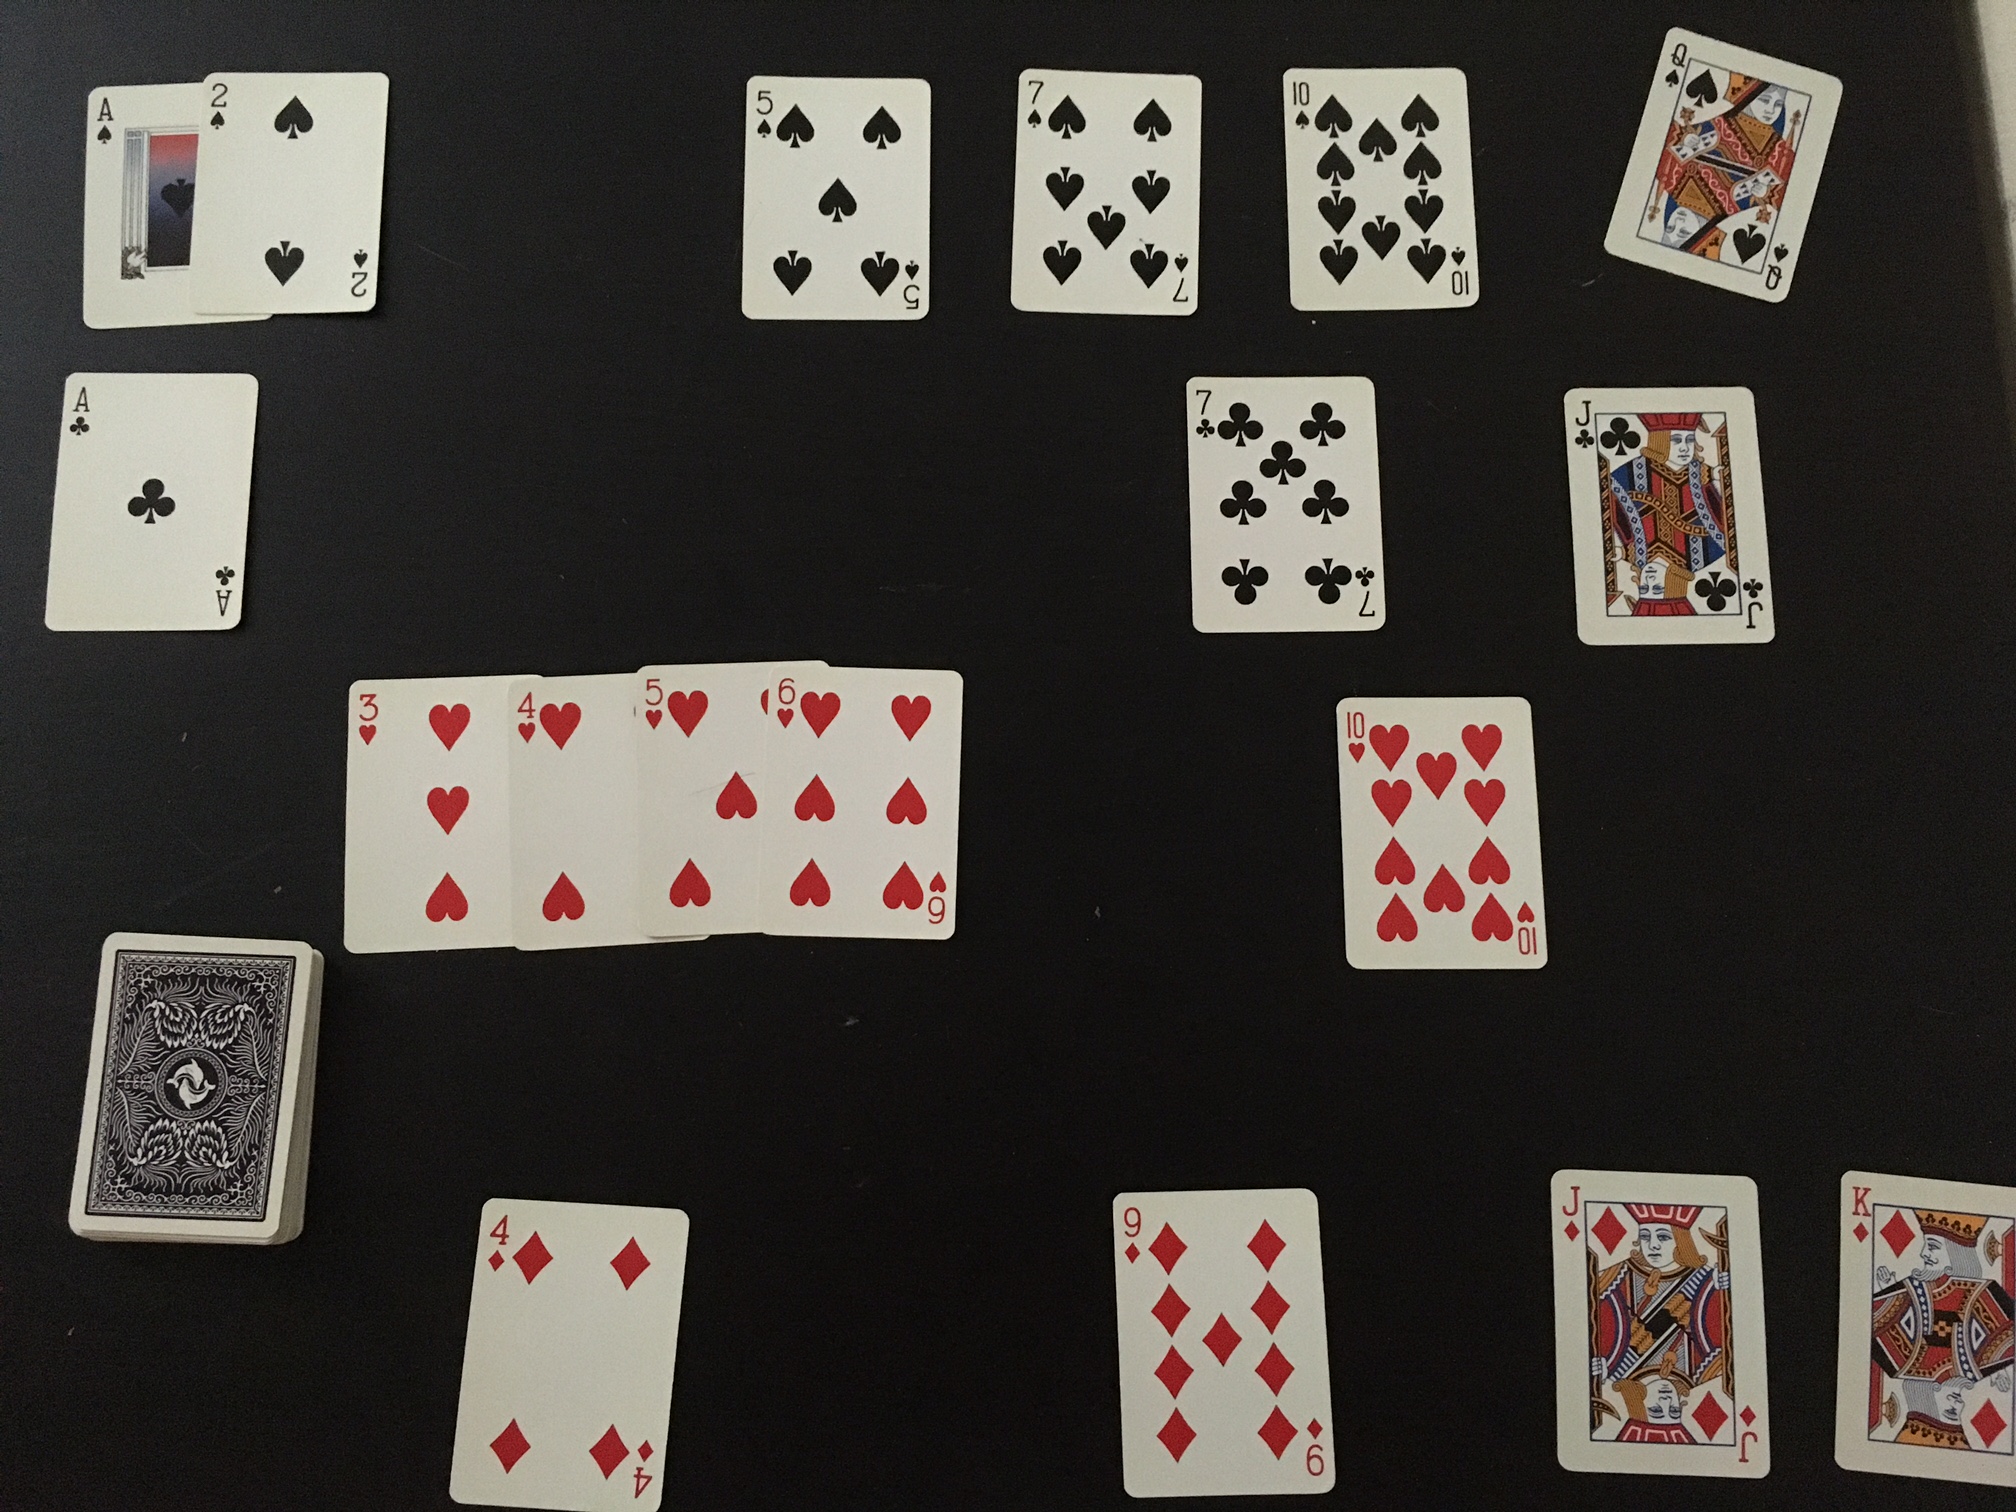 Picture of cards laid out on a table